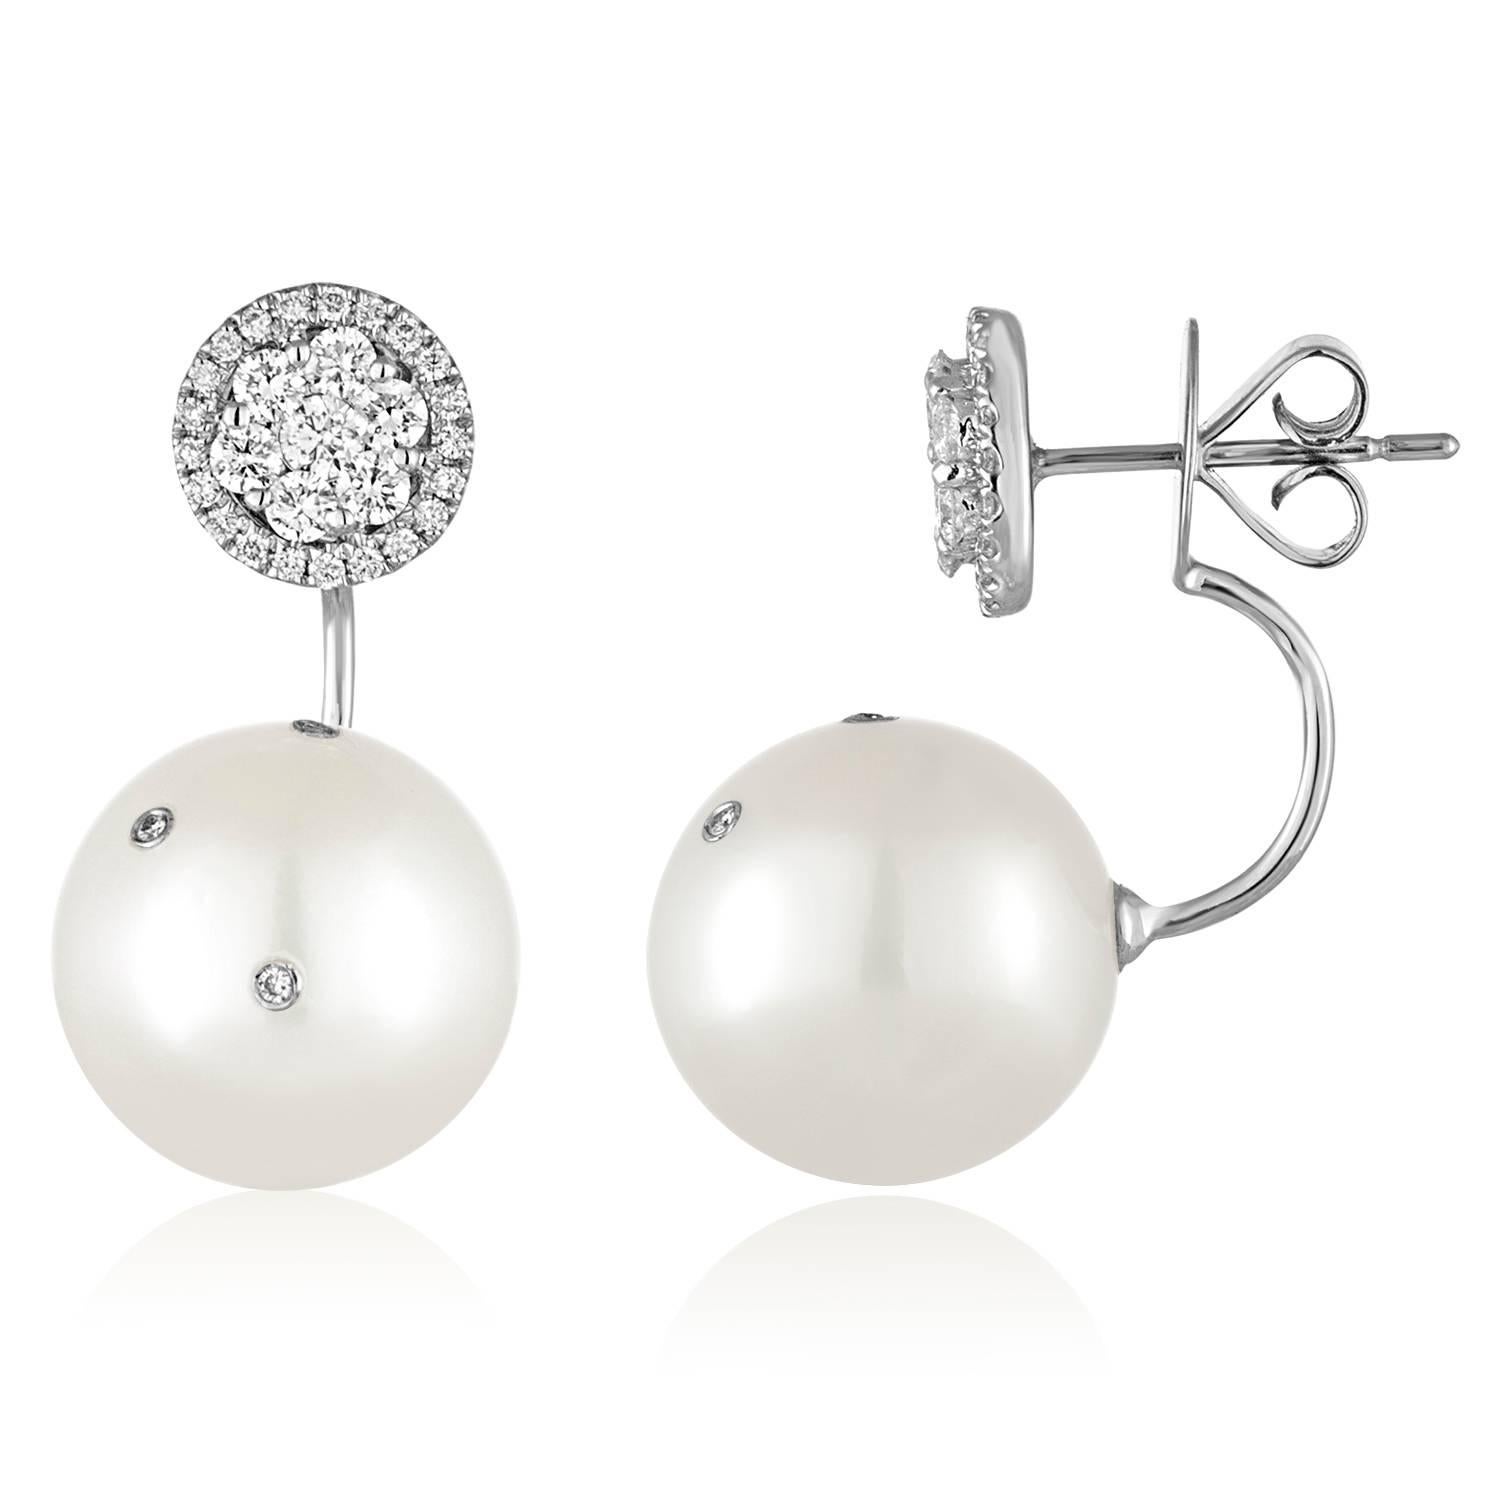 The earrings are 18K White Gold.
There are 0.82Ct Diamonds F VS.
The South Sea Pearls are 14MM.
The earrings are approximately 1